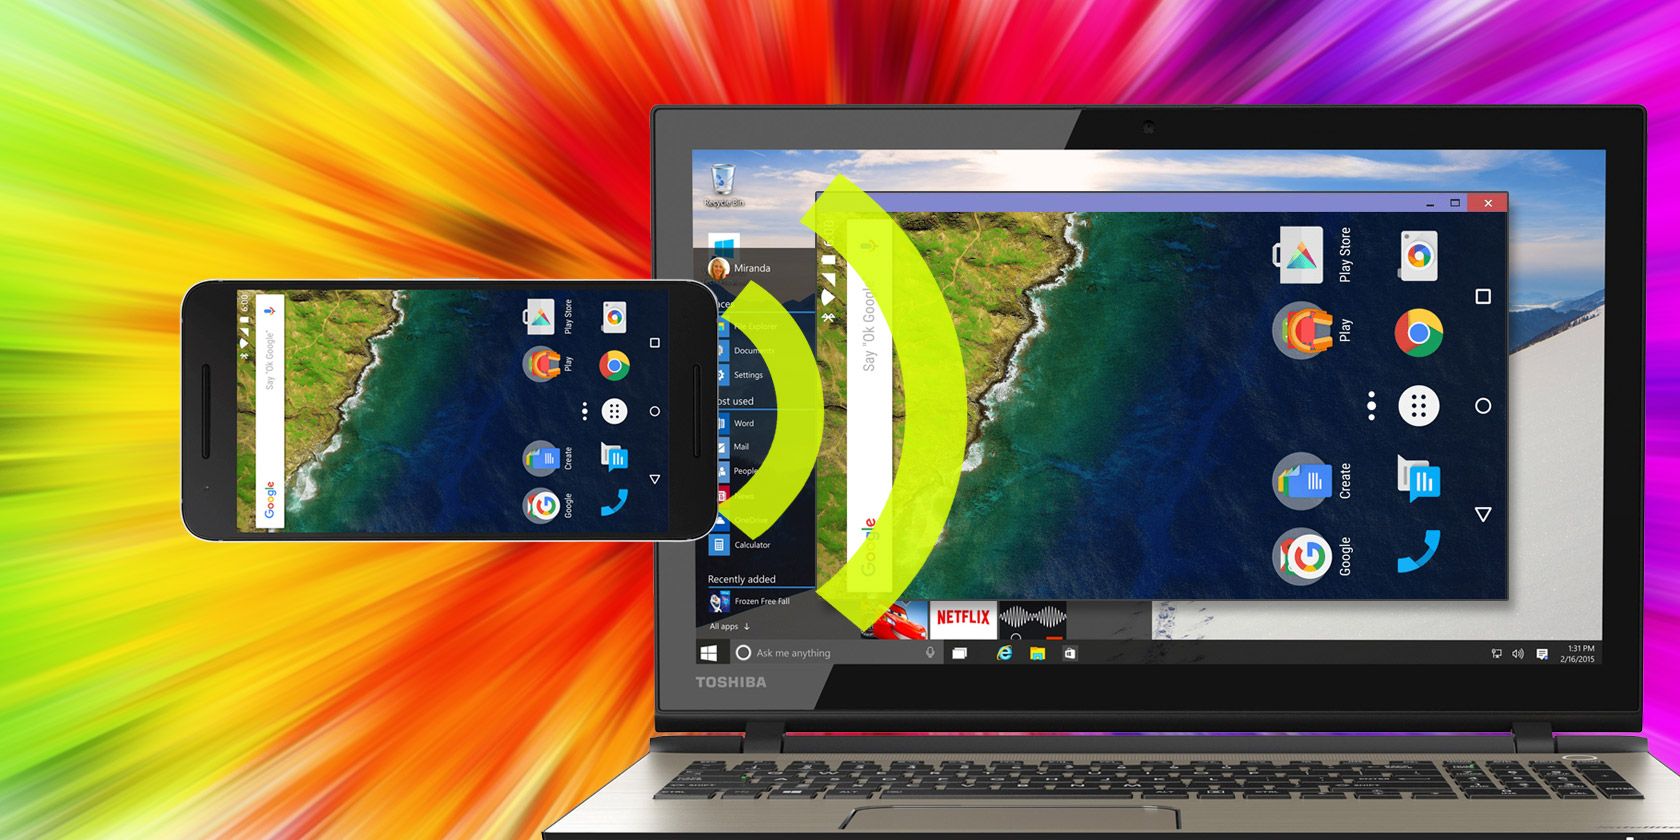 Cast Your Android Screen To Windows 10, How To Mirror Android Screen On Laptop Windows 10